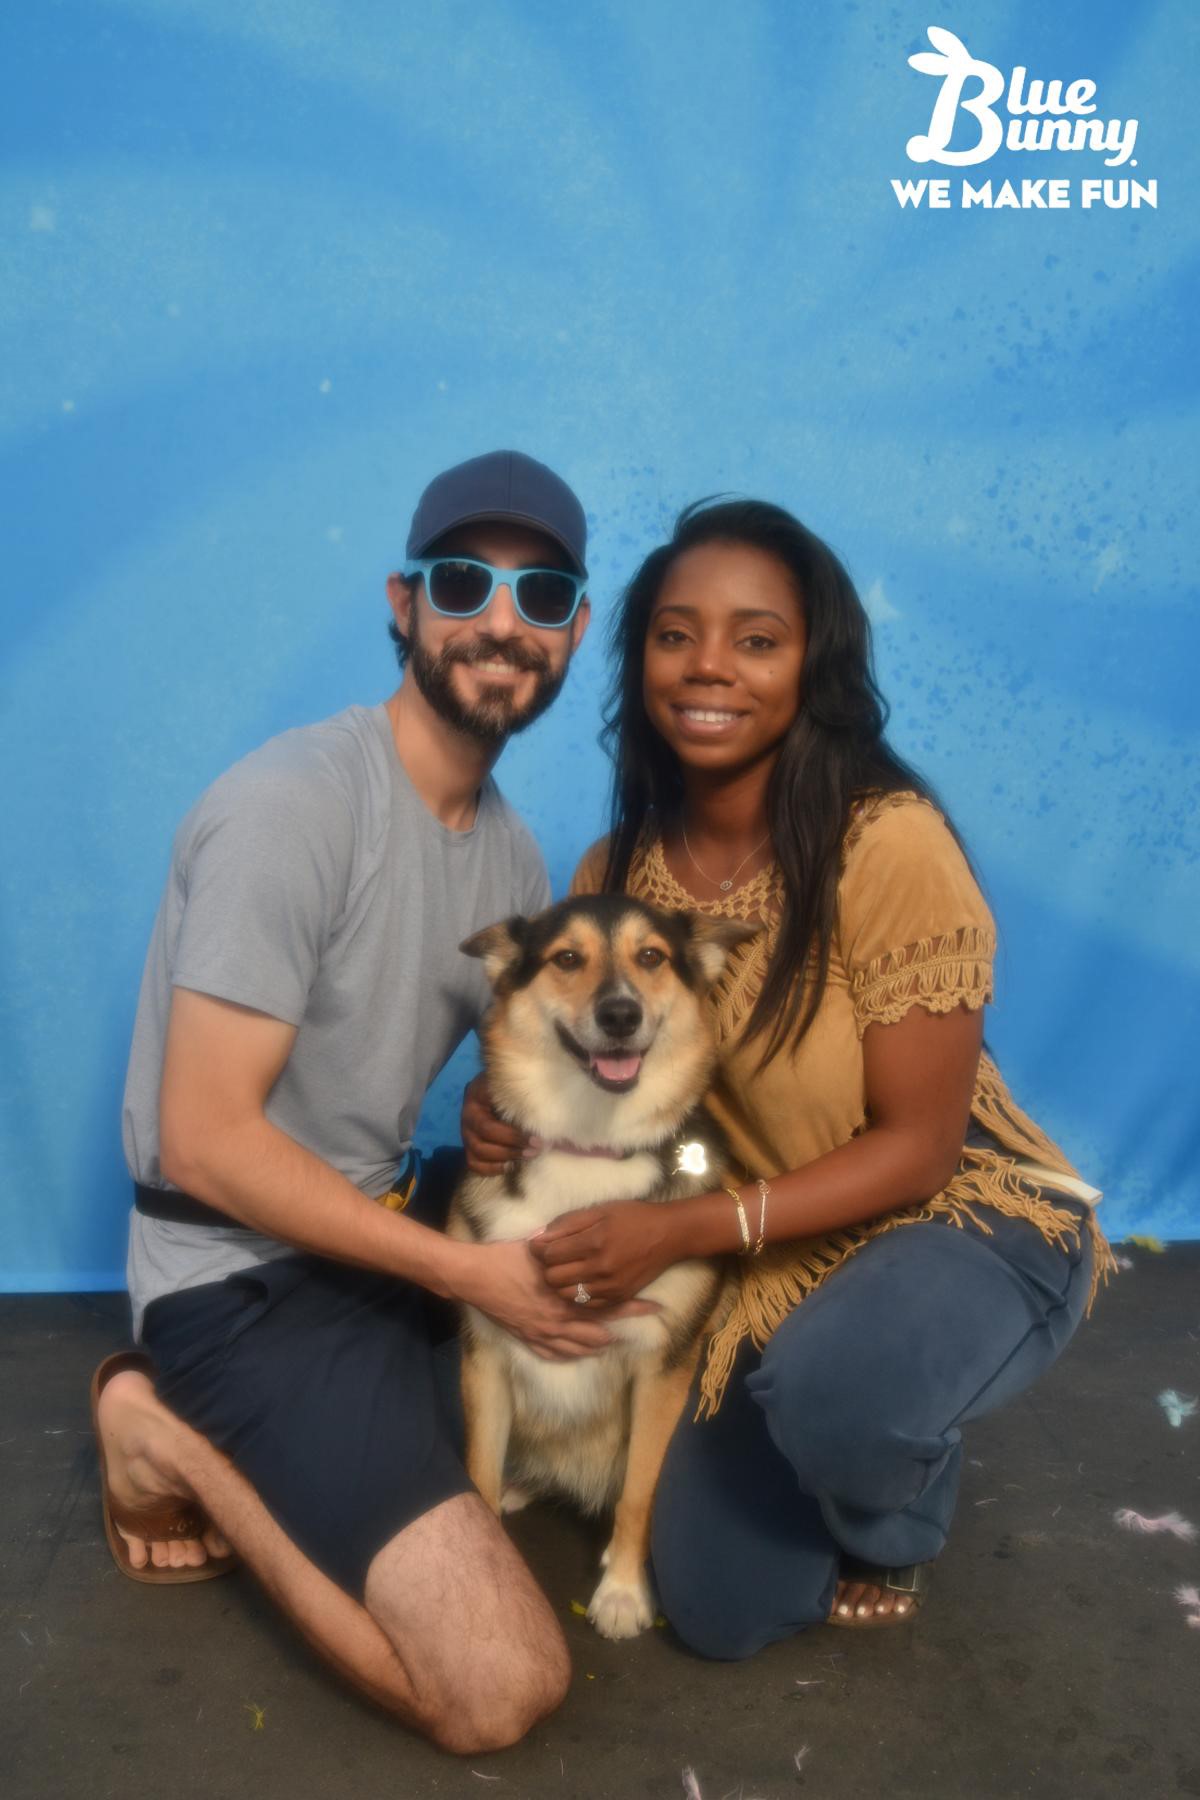 A couple with their dog